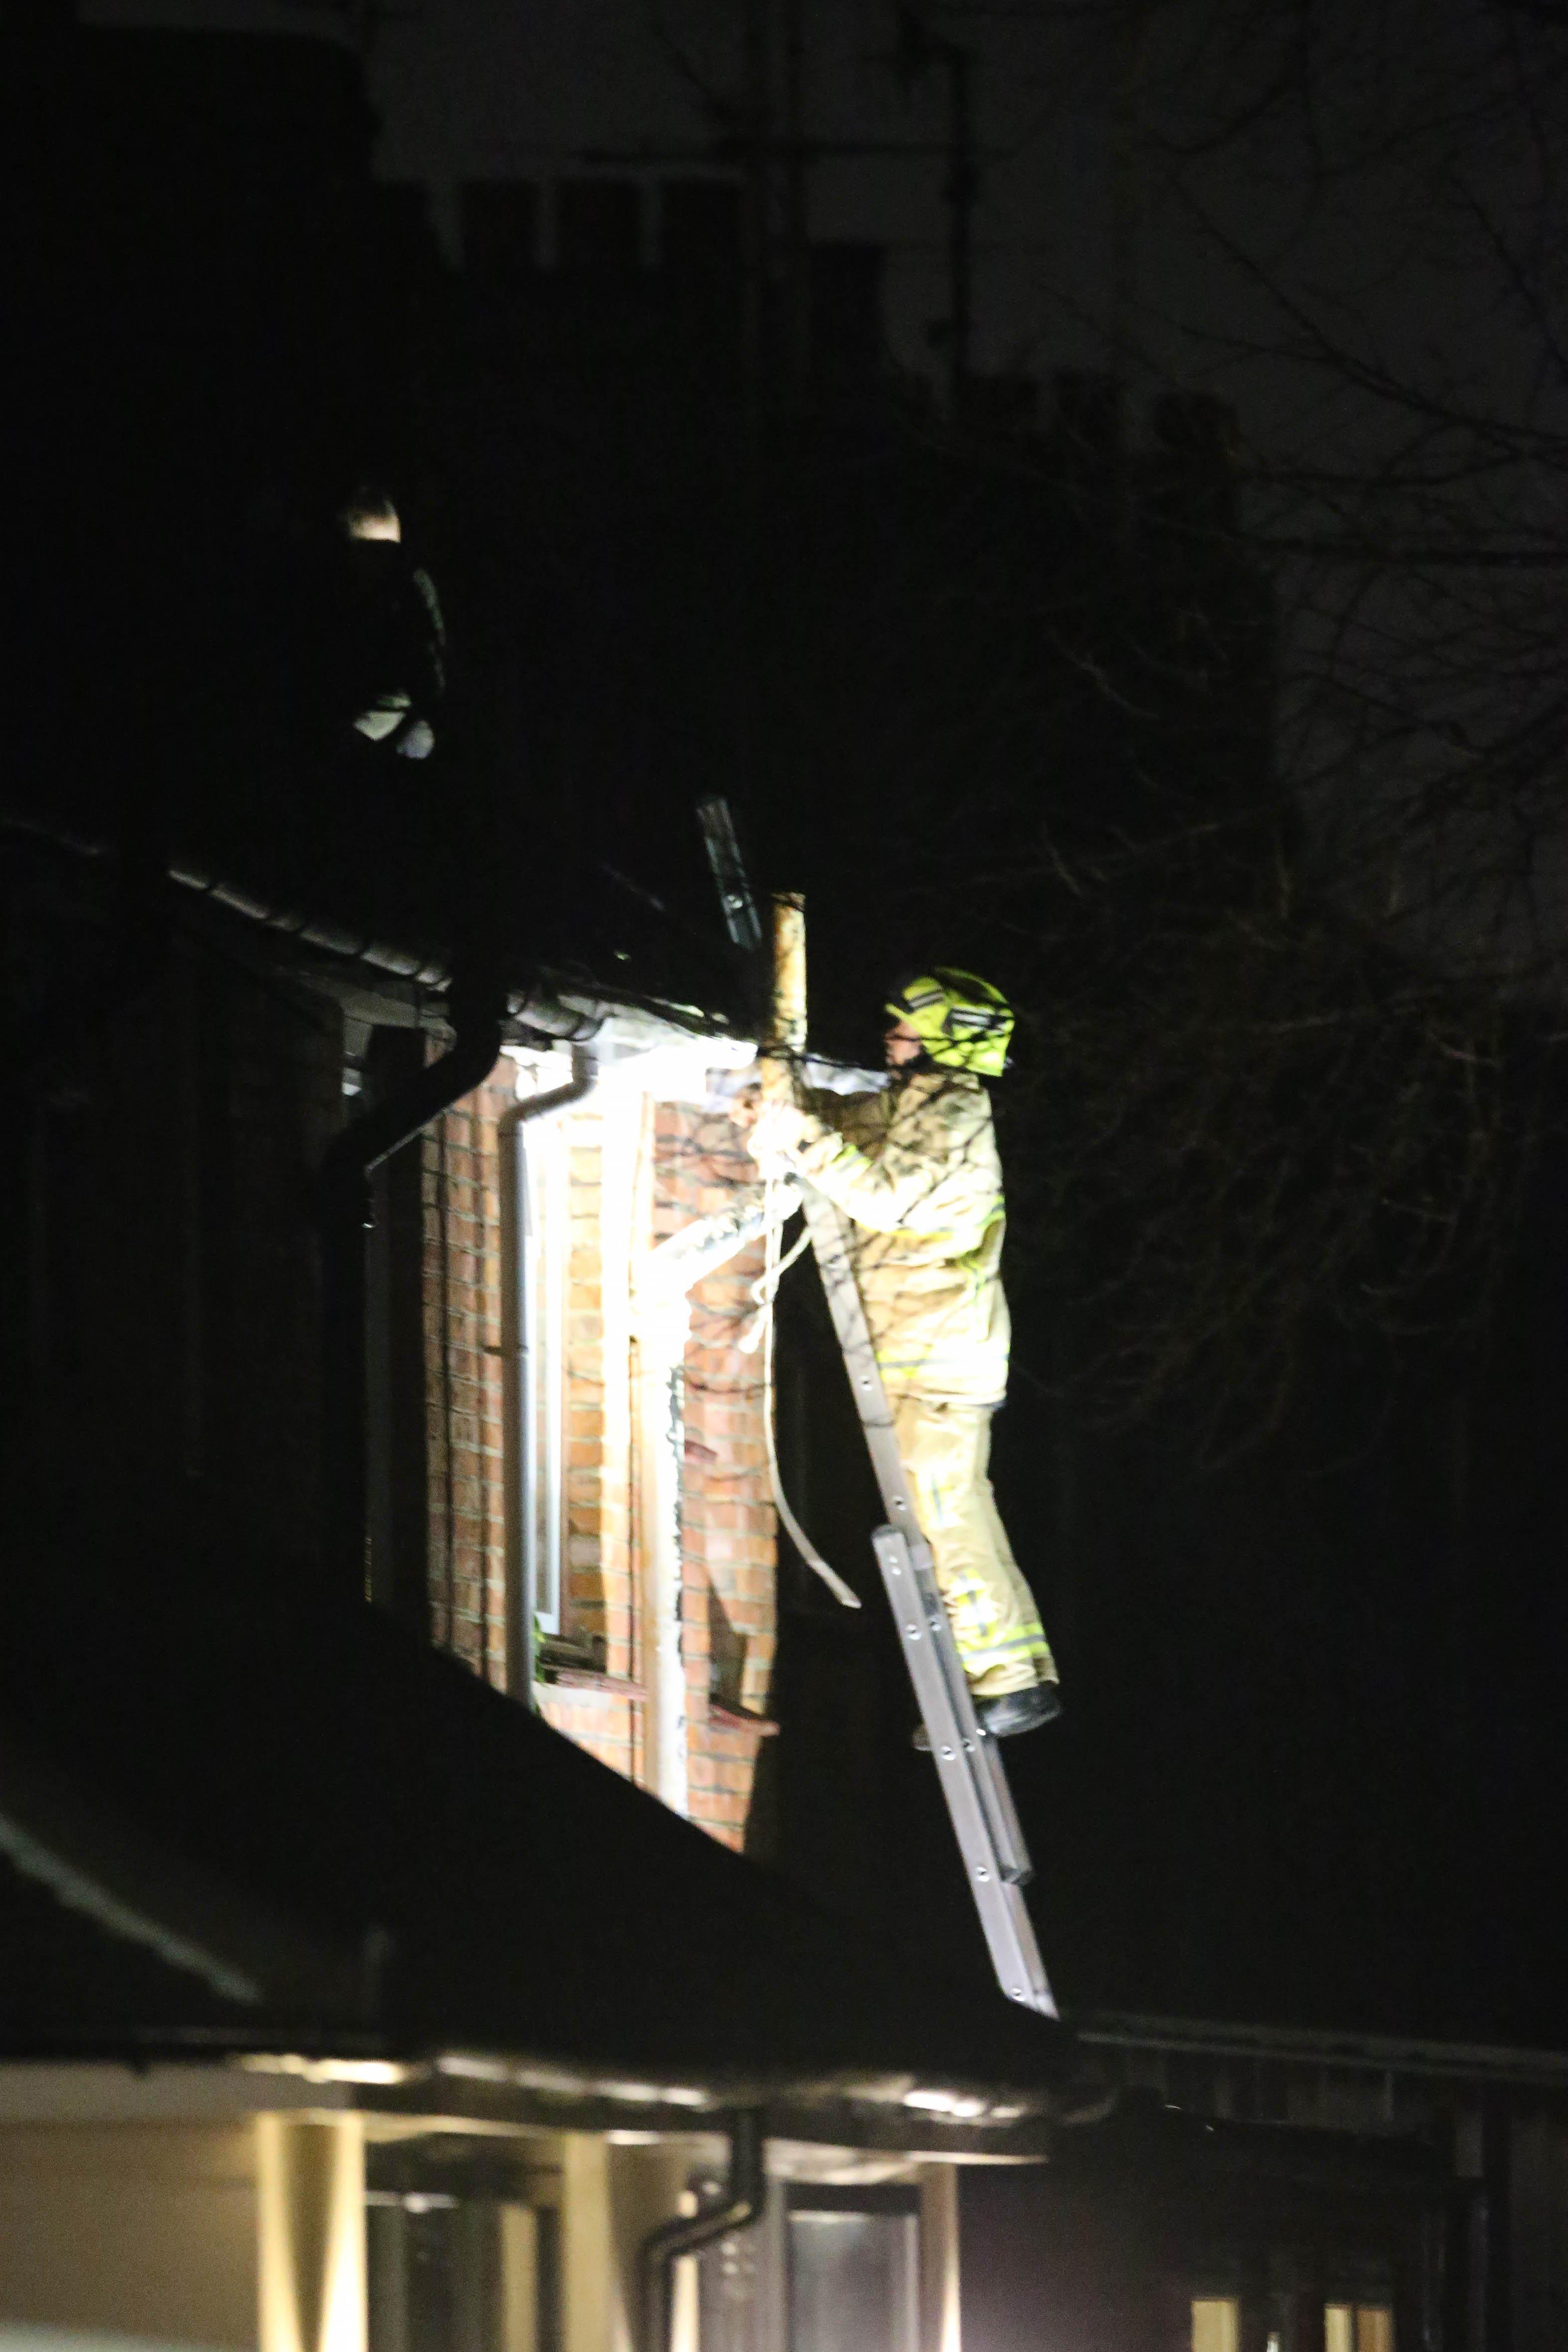 A firefighter bravely confronted the man after reaching the roof of the house.